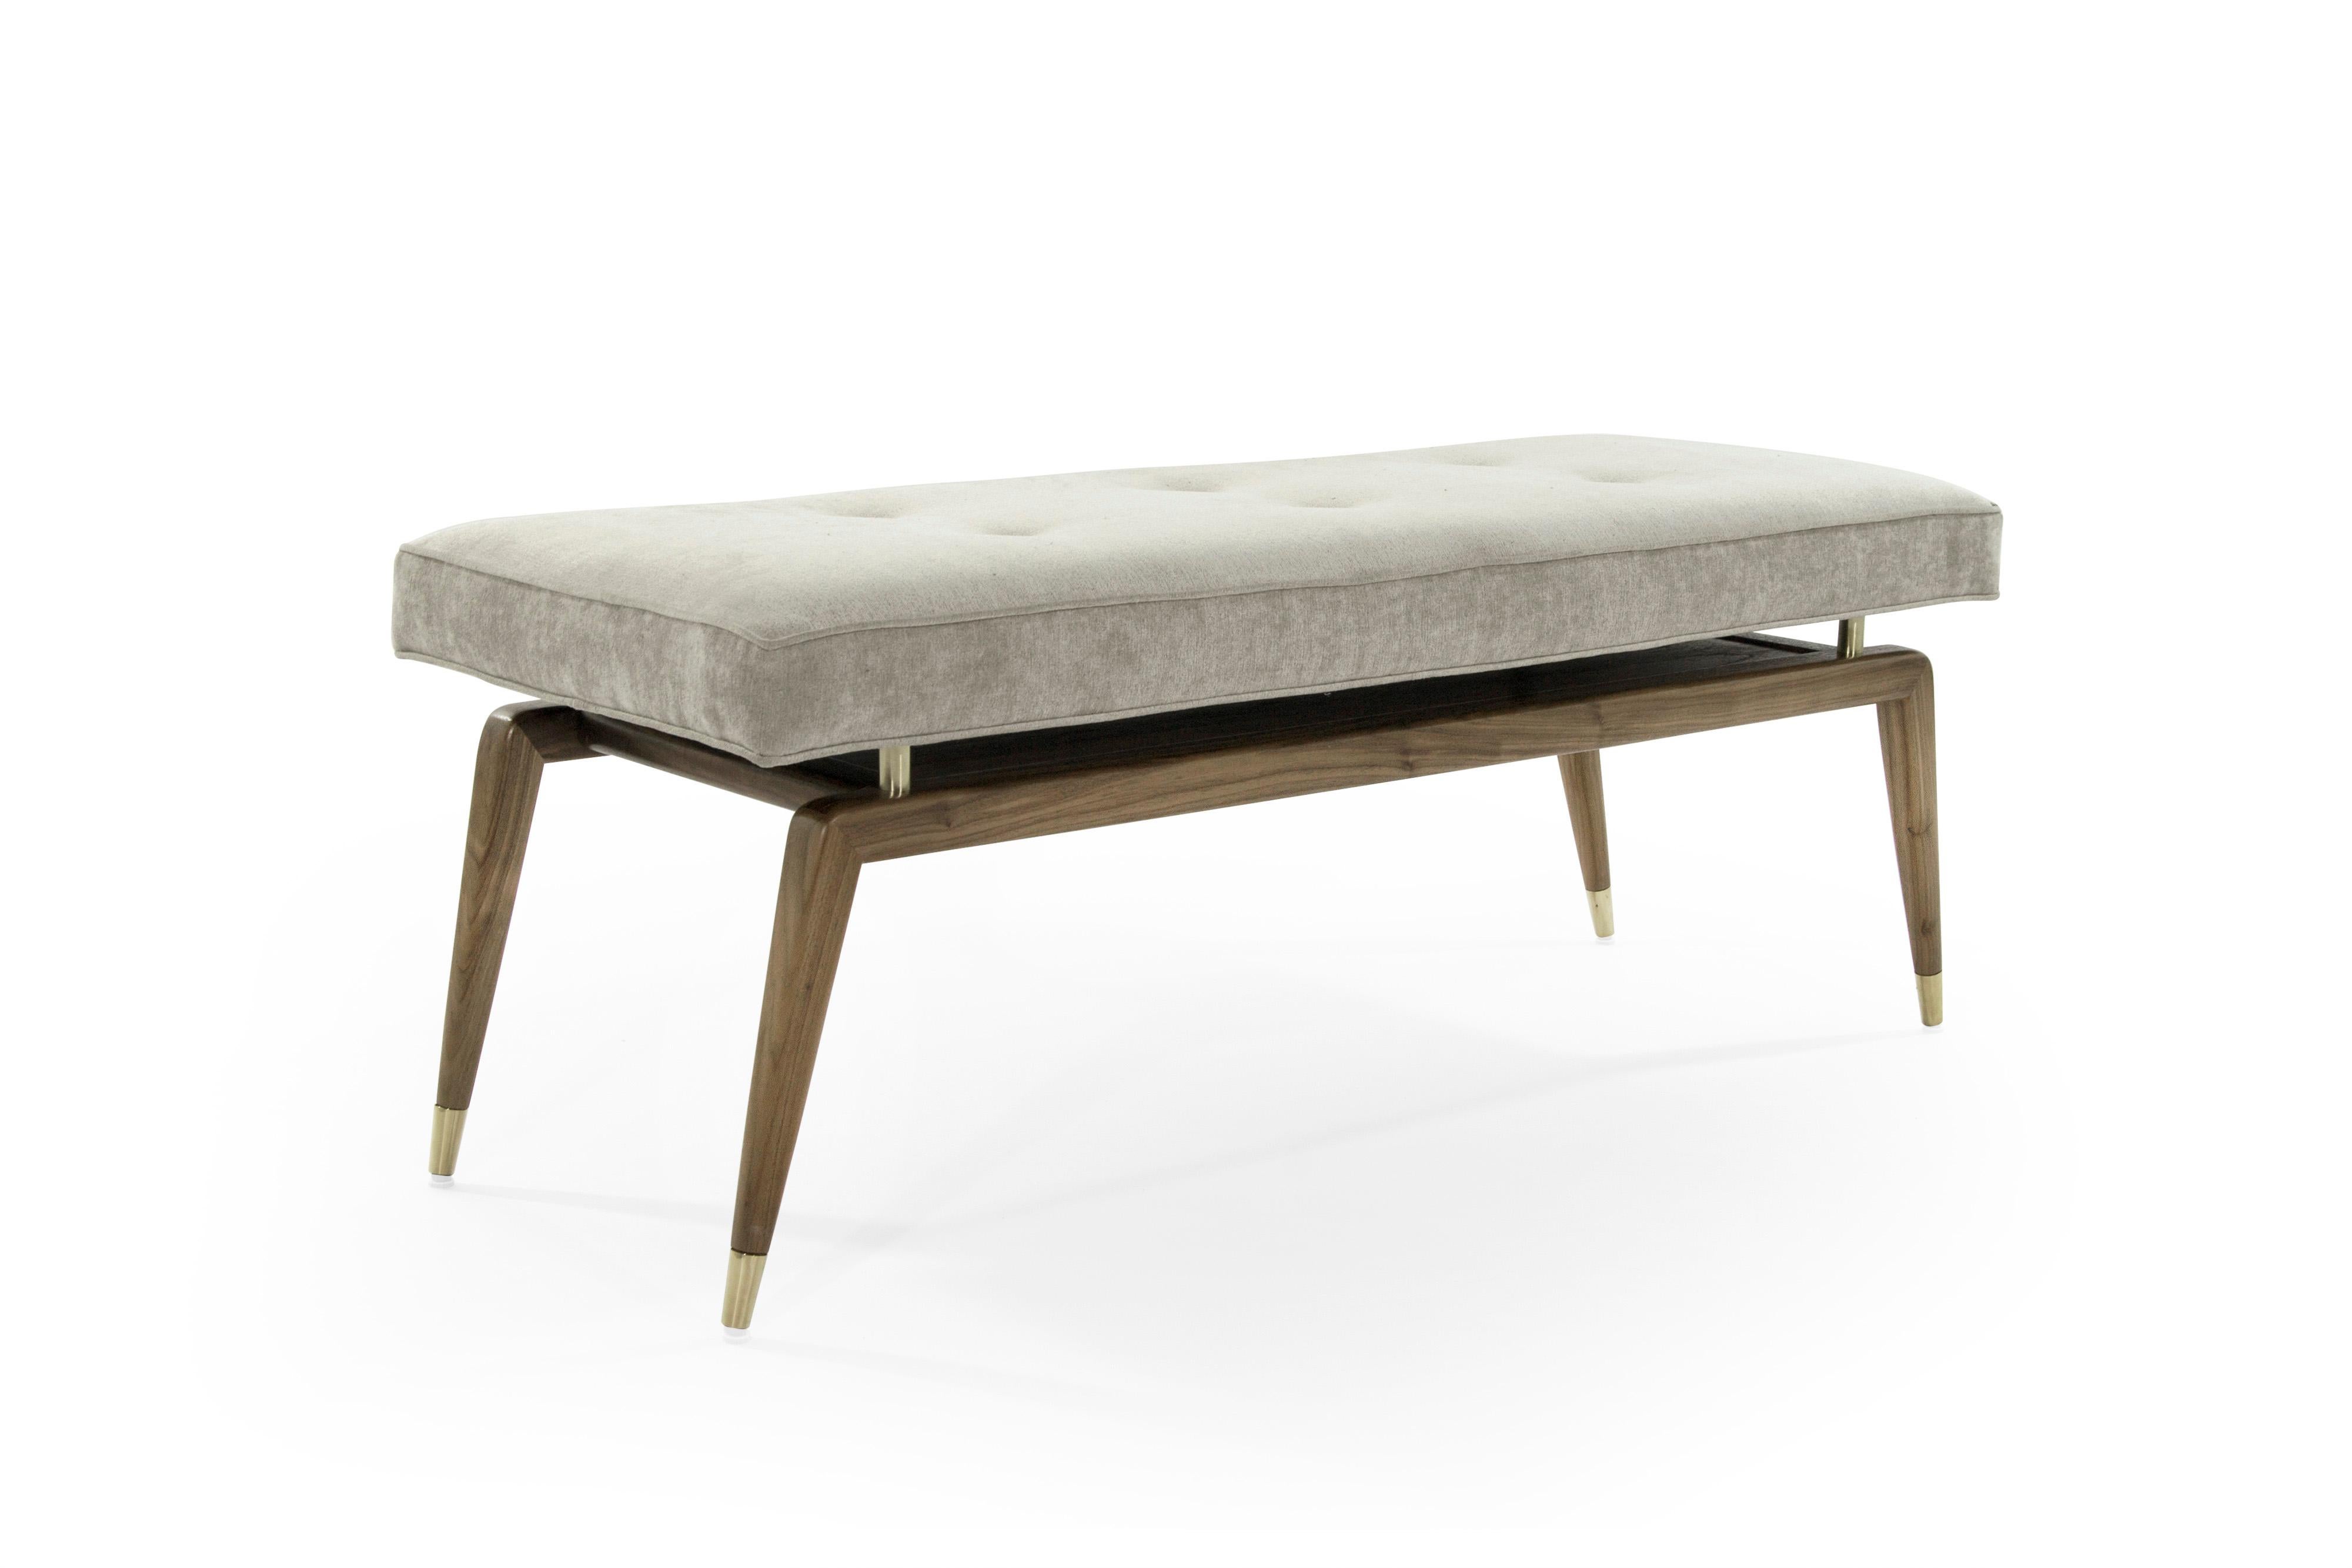 Stunning solid walnut bench in a natural finish, floating cushion newly upholstered in taupe velvet by Holly Hunt. Space underneath cushion provides excellent storage space for magazines, books or newspapers.